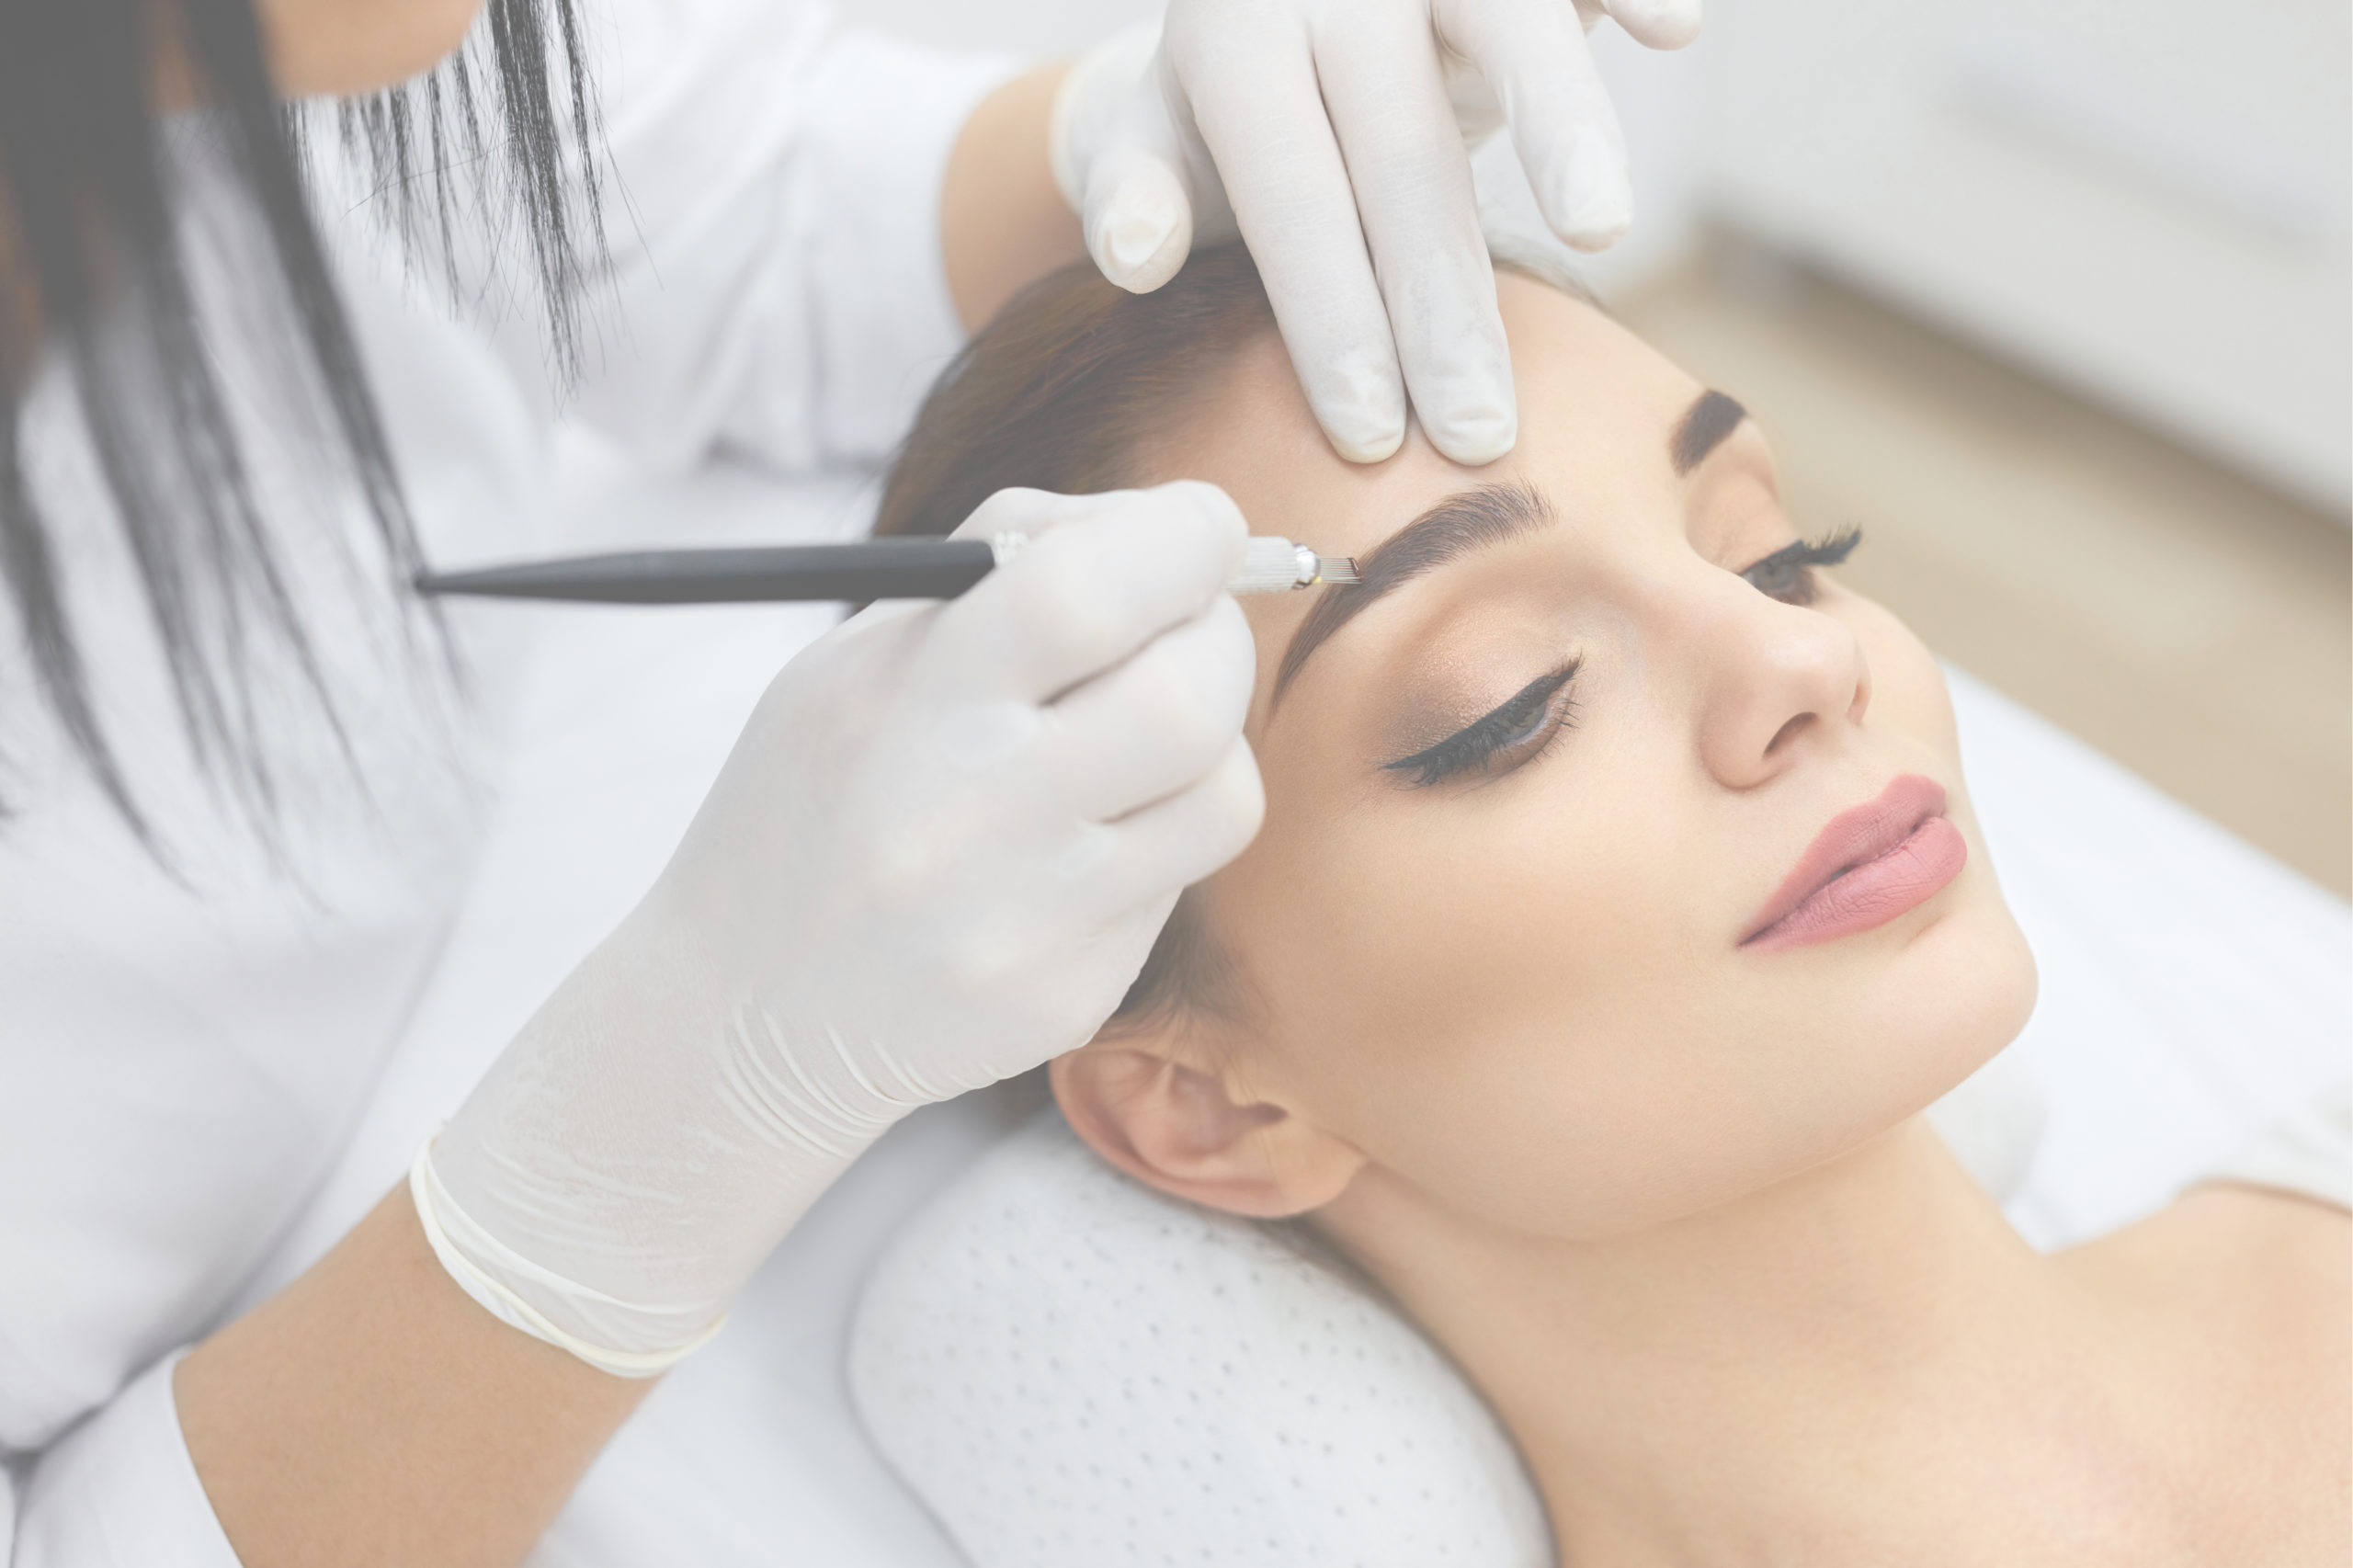 Why is client consent important for Microblading?